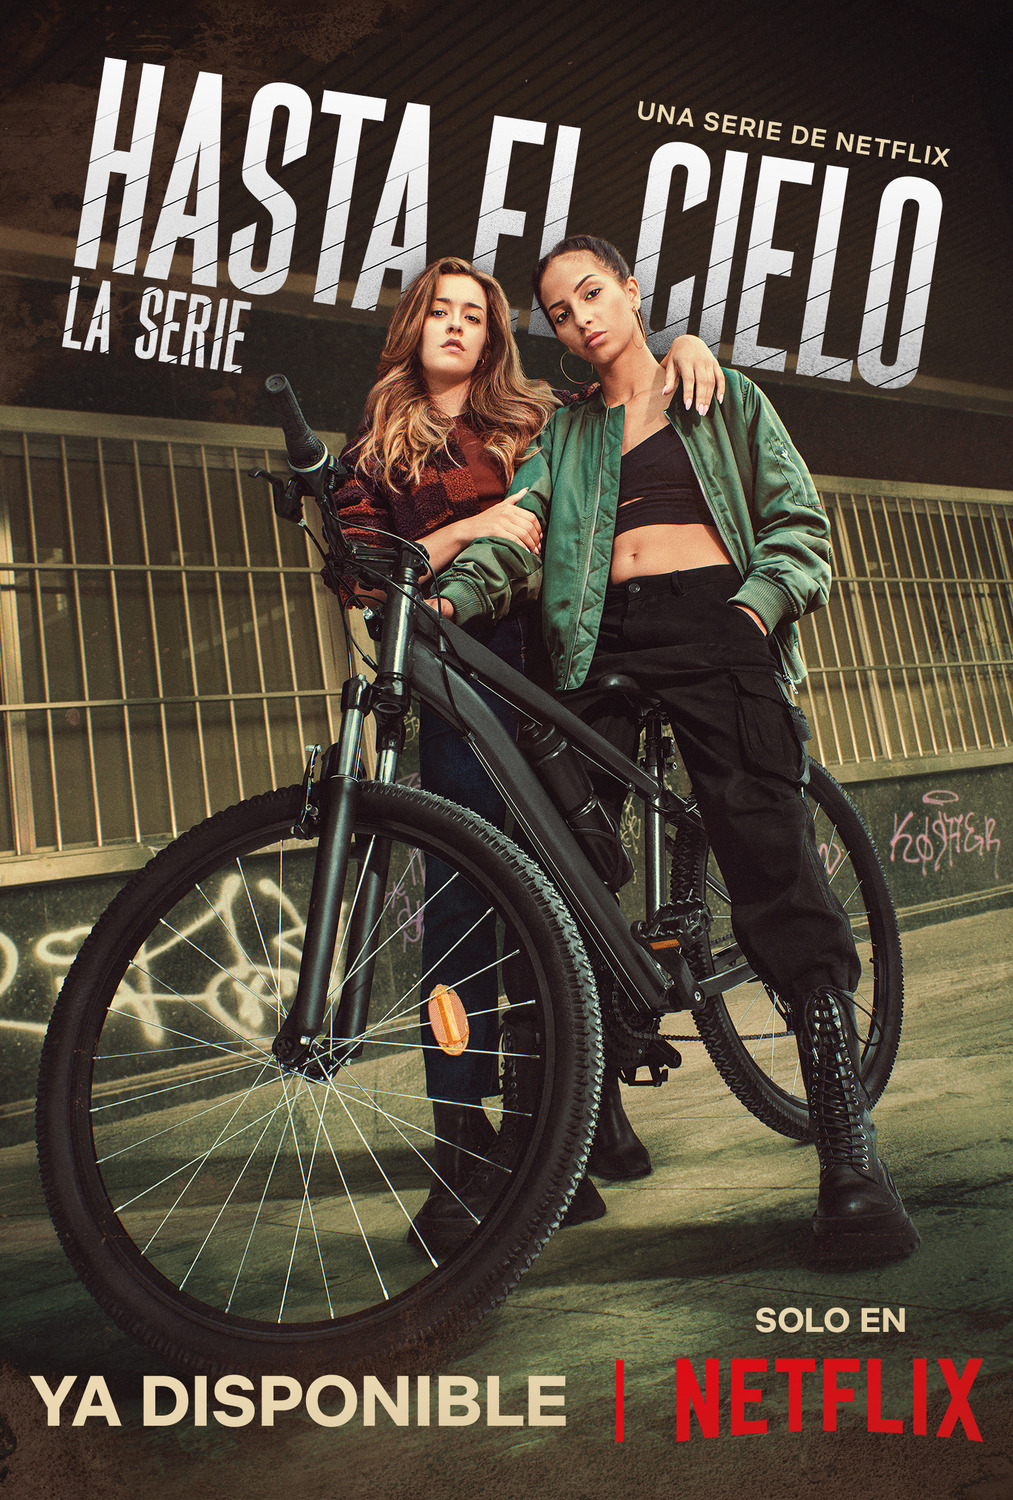 Extra Large TV Poster Image for Hasta el cielo: La serie (#5 of 7)